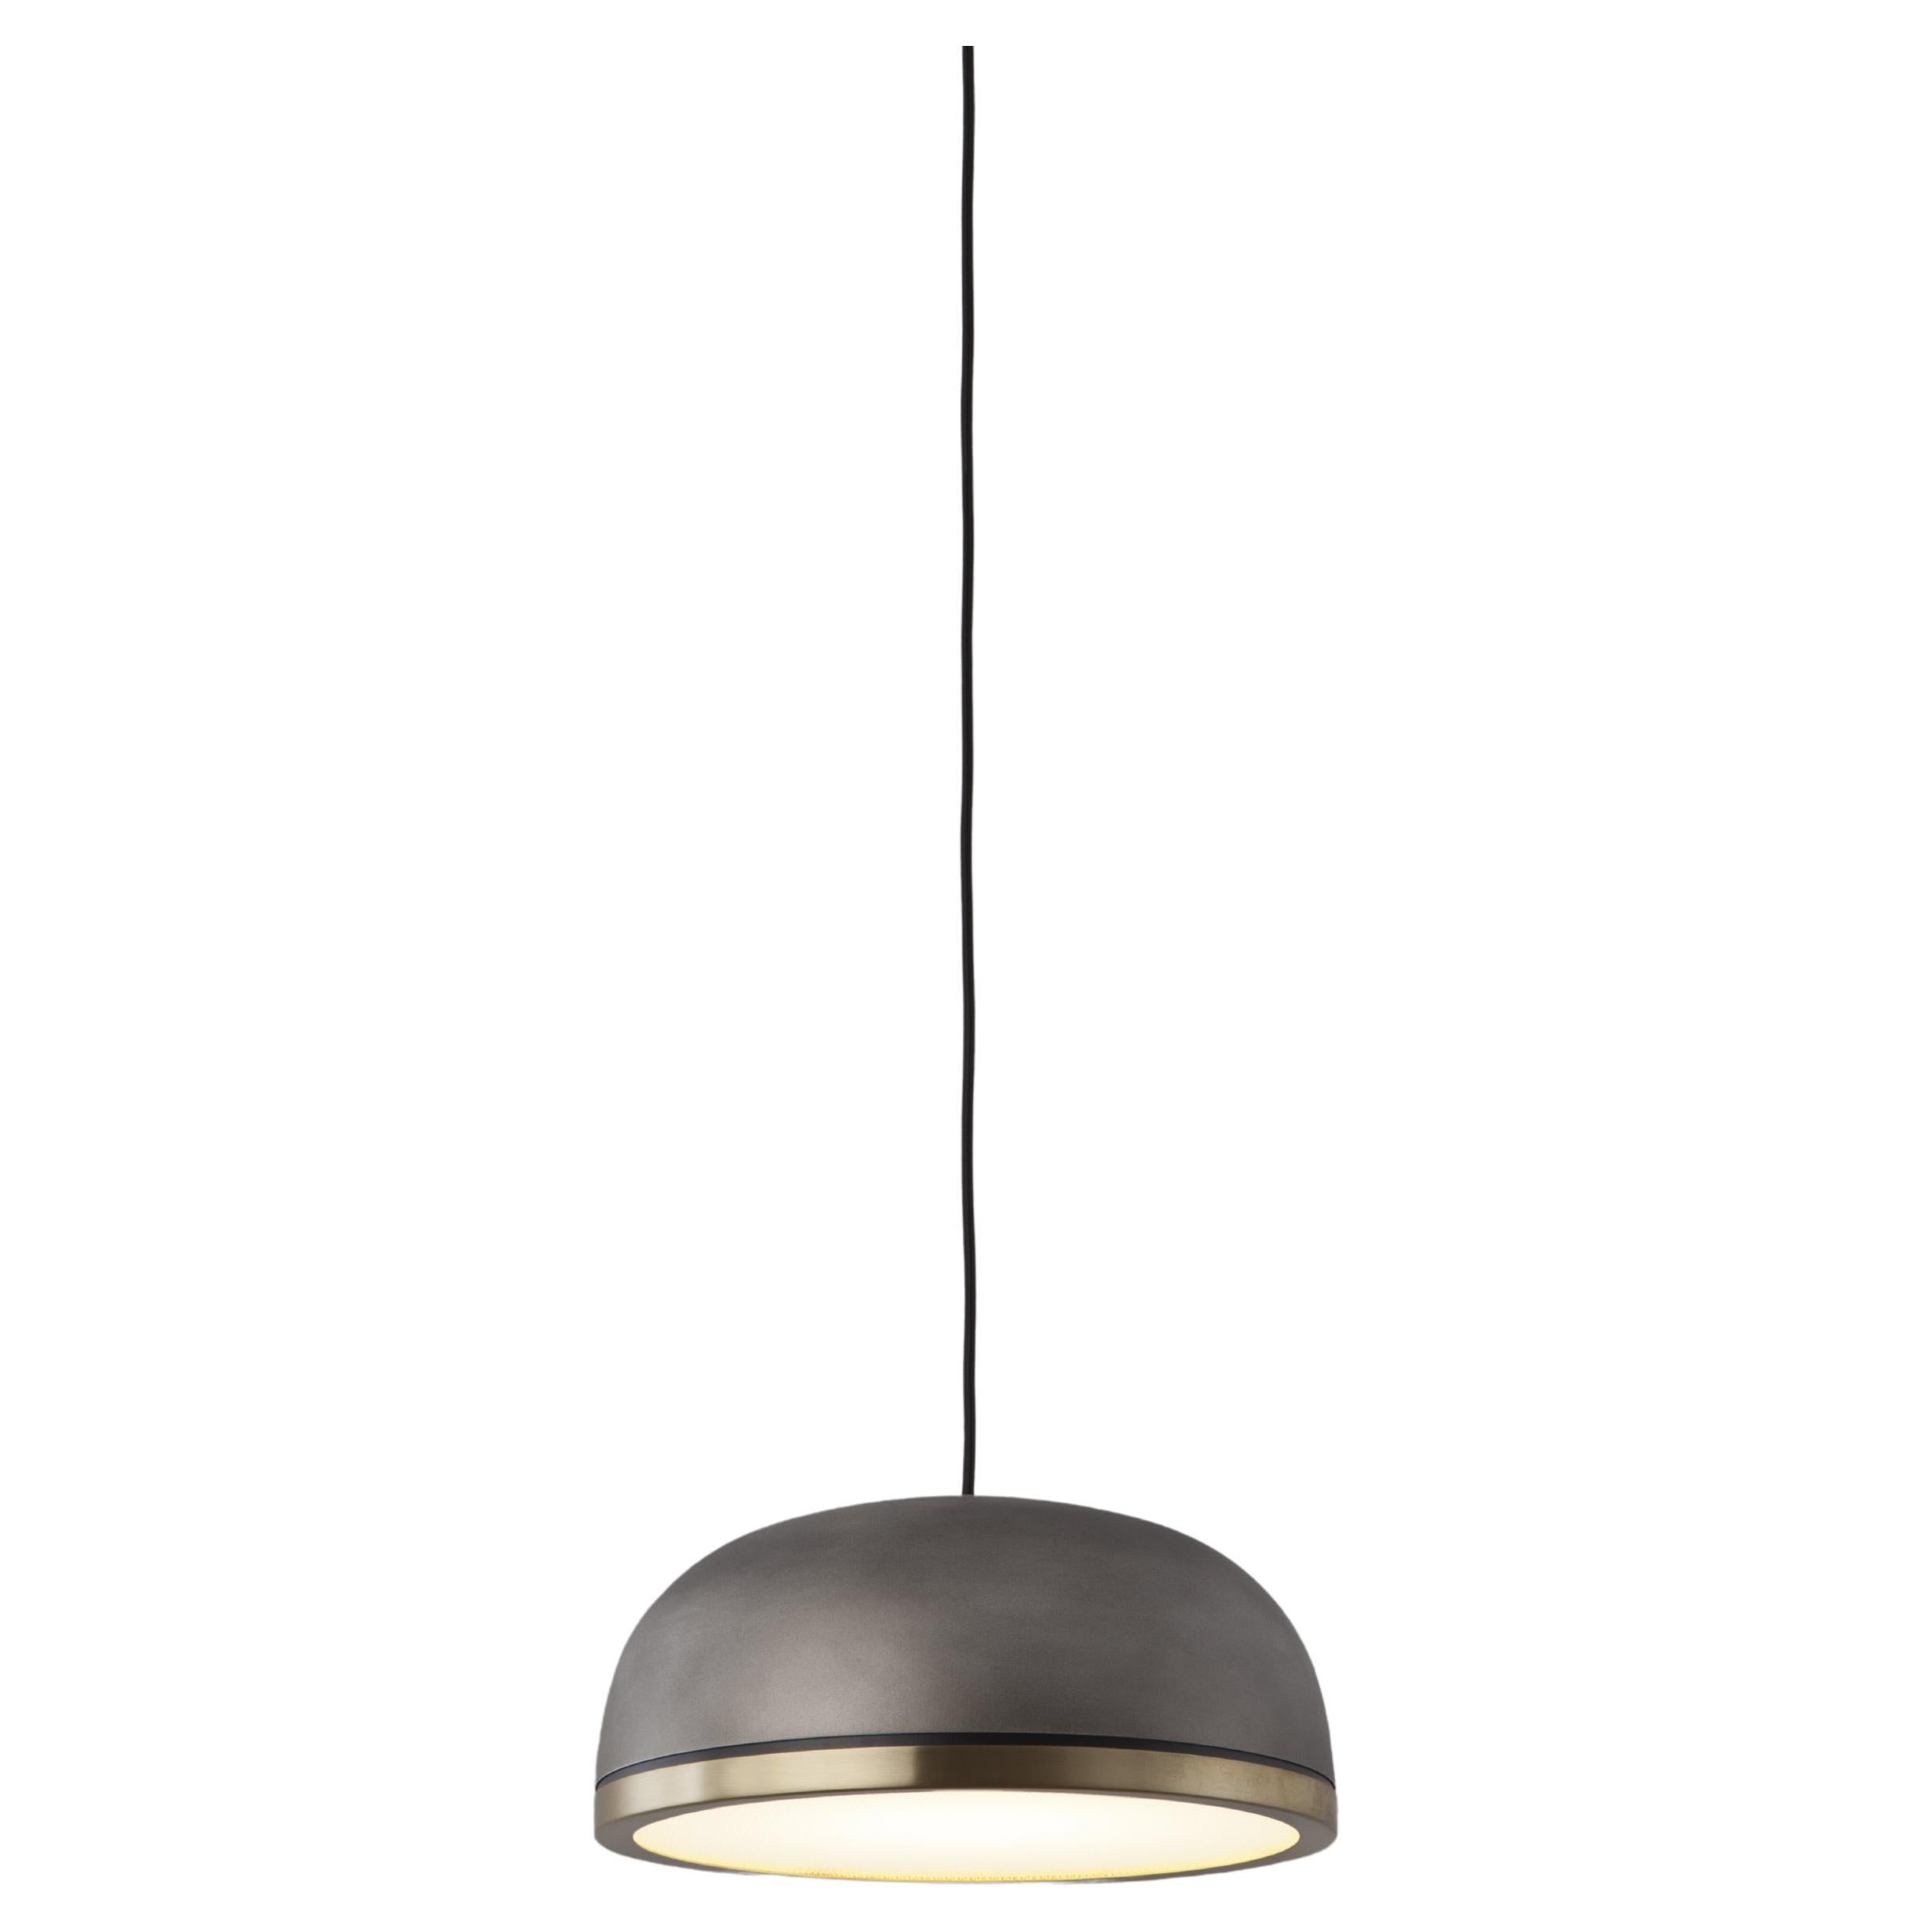 Contemporary Pendant Lamp 'Molly 556.23' by TOOY, Metal and Pewter